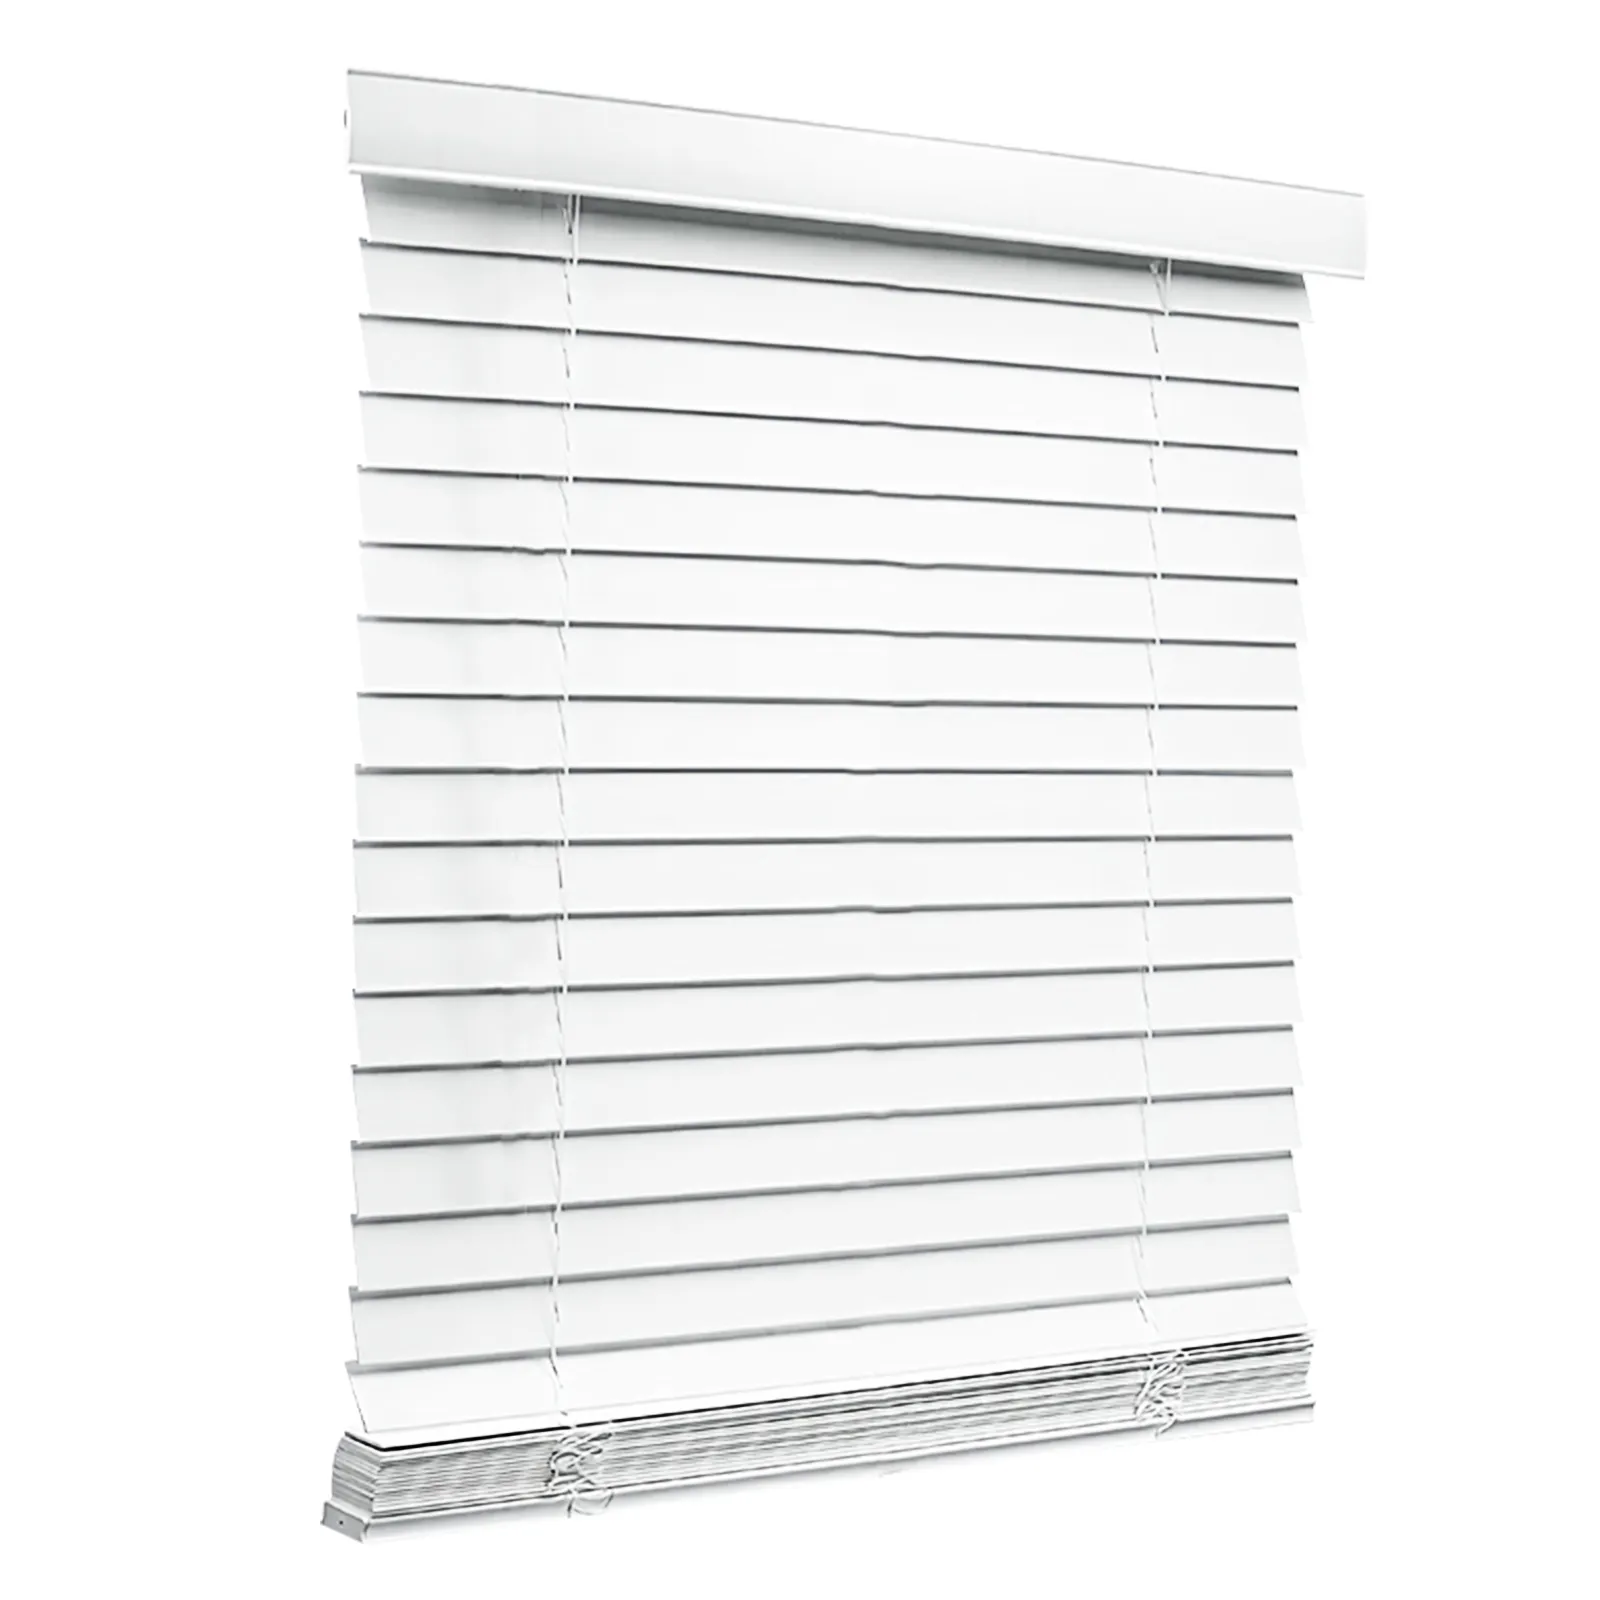 American popular faux wood blinds cordless 2 inch fauxwood blind